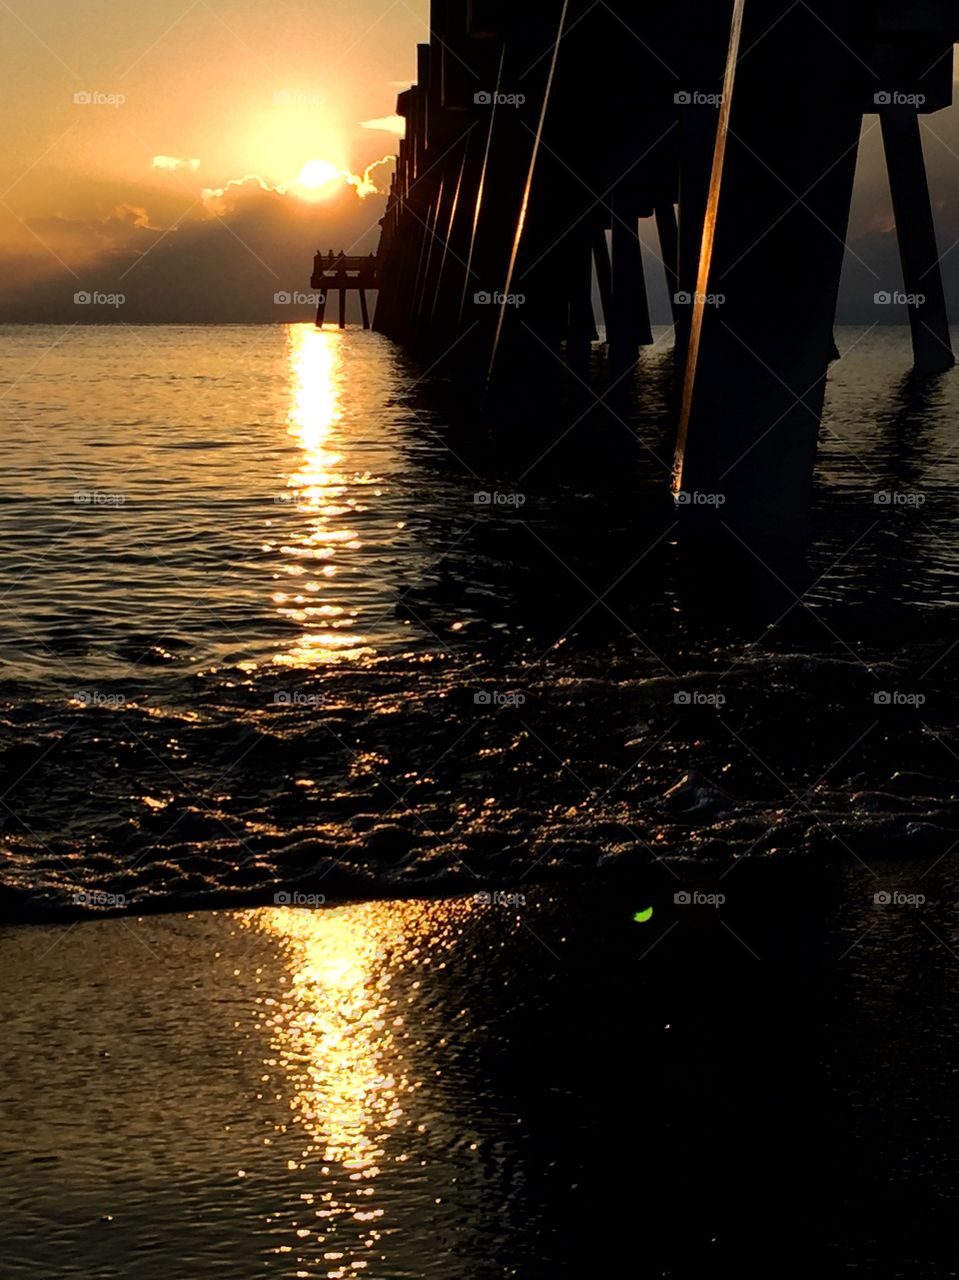 This was taken during sunrise underneath the Jupiter pier.  An amazing array of gold gave an unforgettable start to an amazing day.